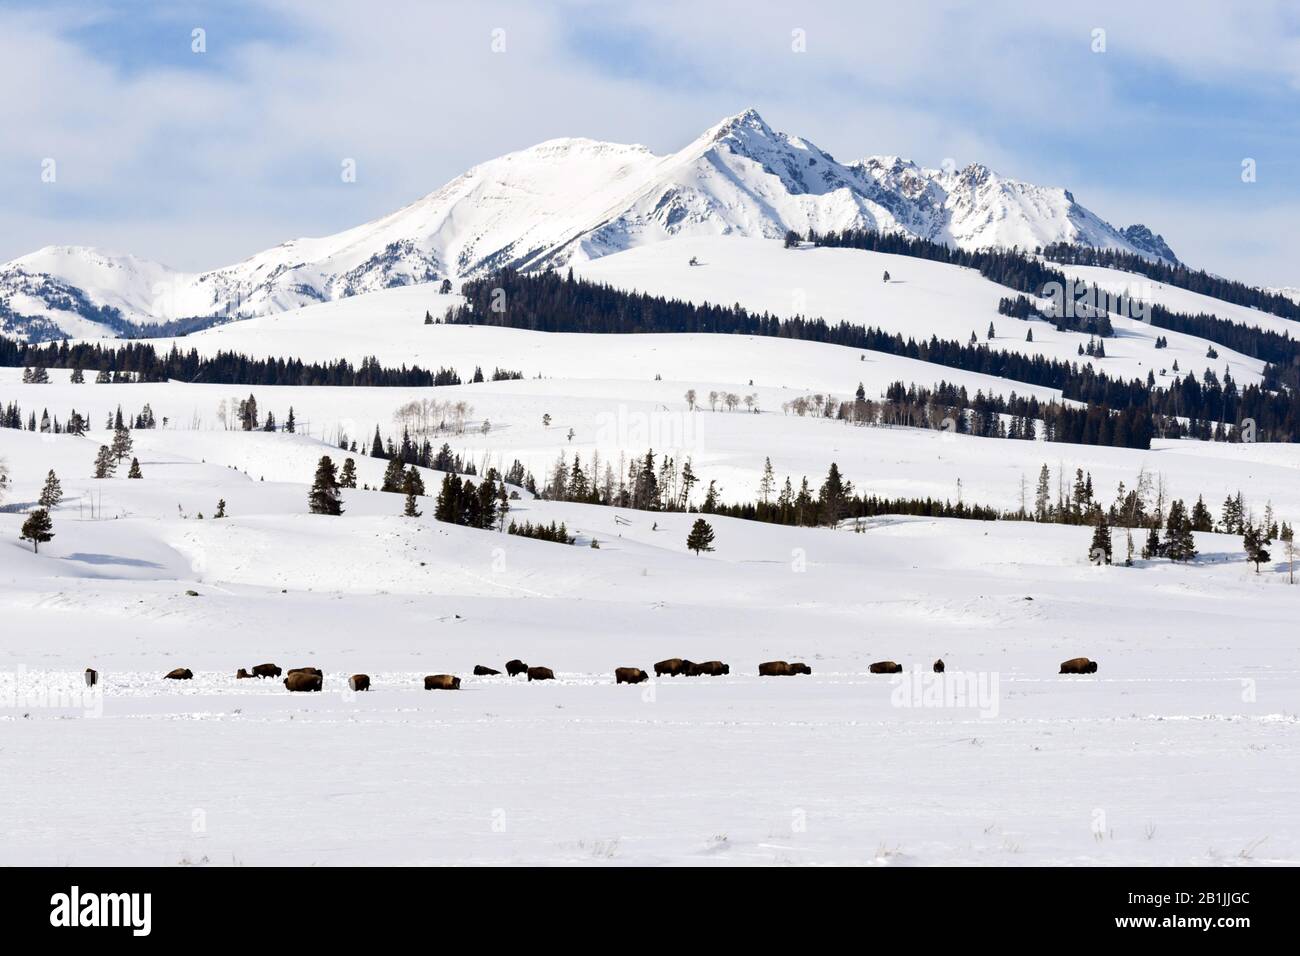 American bison, buffalo (Bison bison), herd grazing in snow-covered Yellowstone National Park, USA, Wyoming, Yellowstone National Park Stock Photo